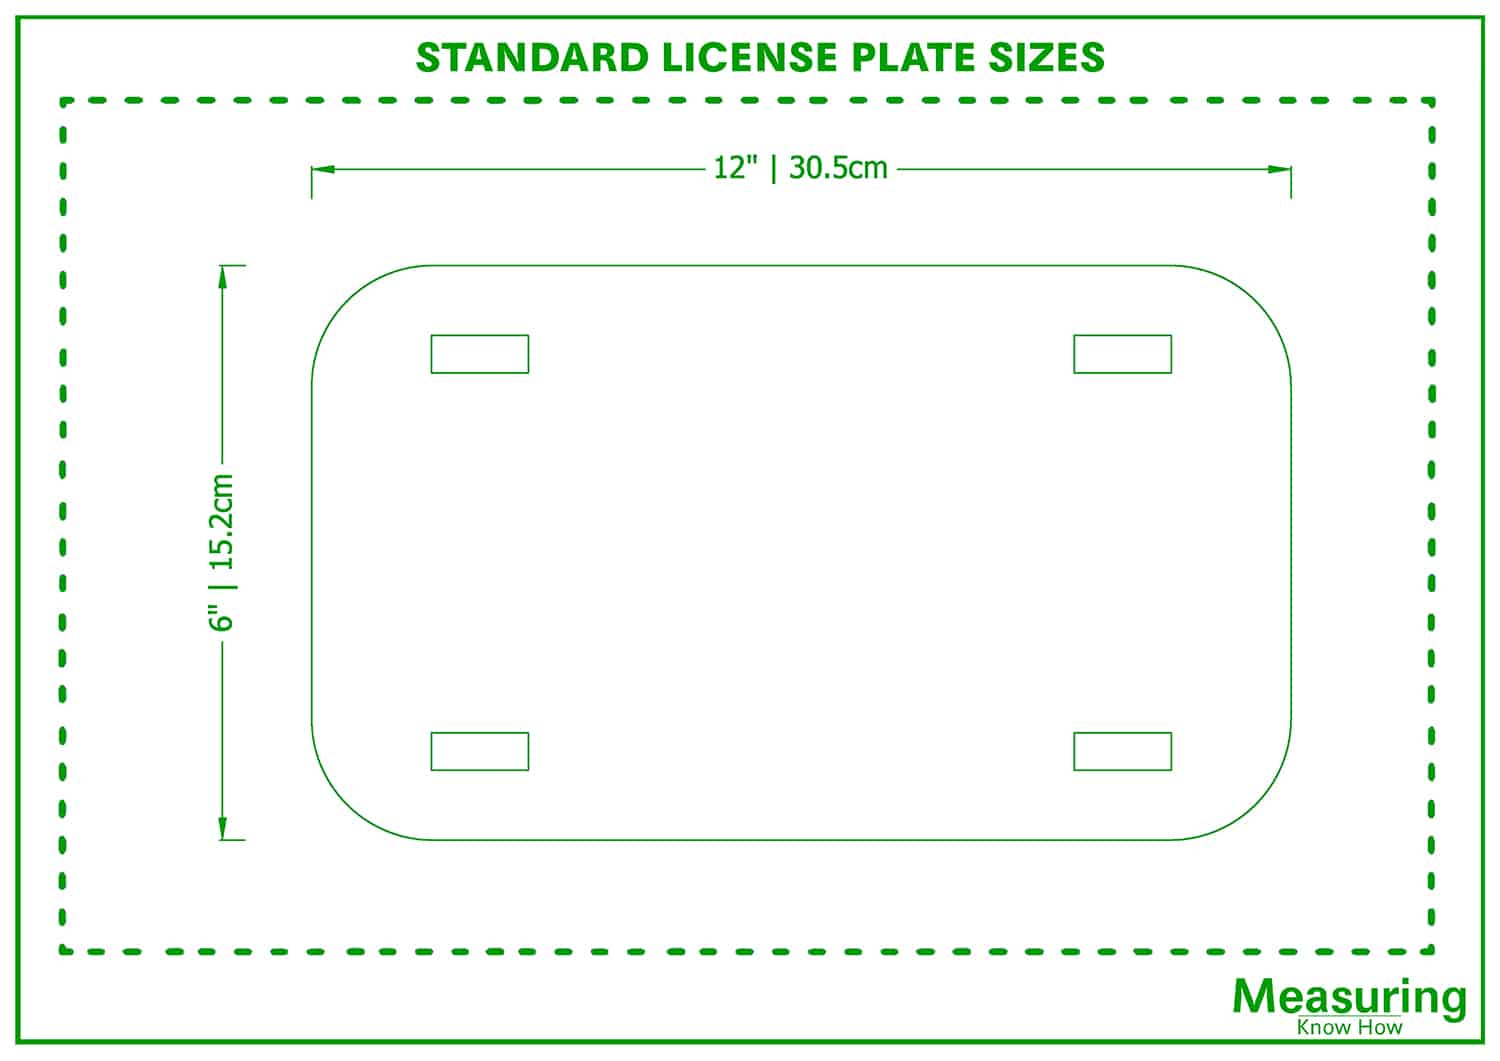 Standard license plate sizes